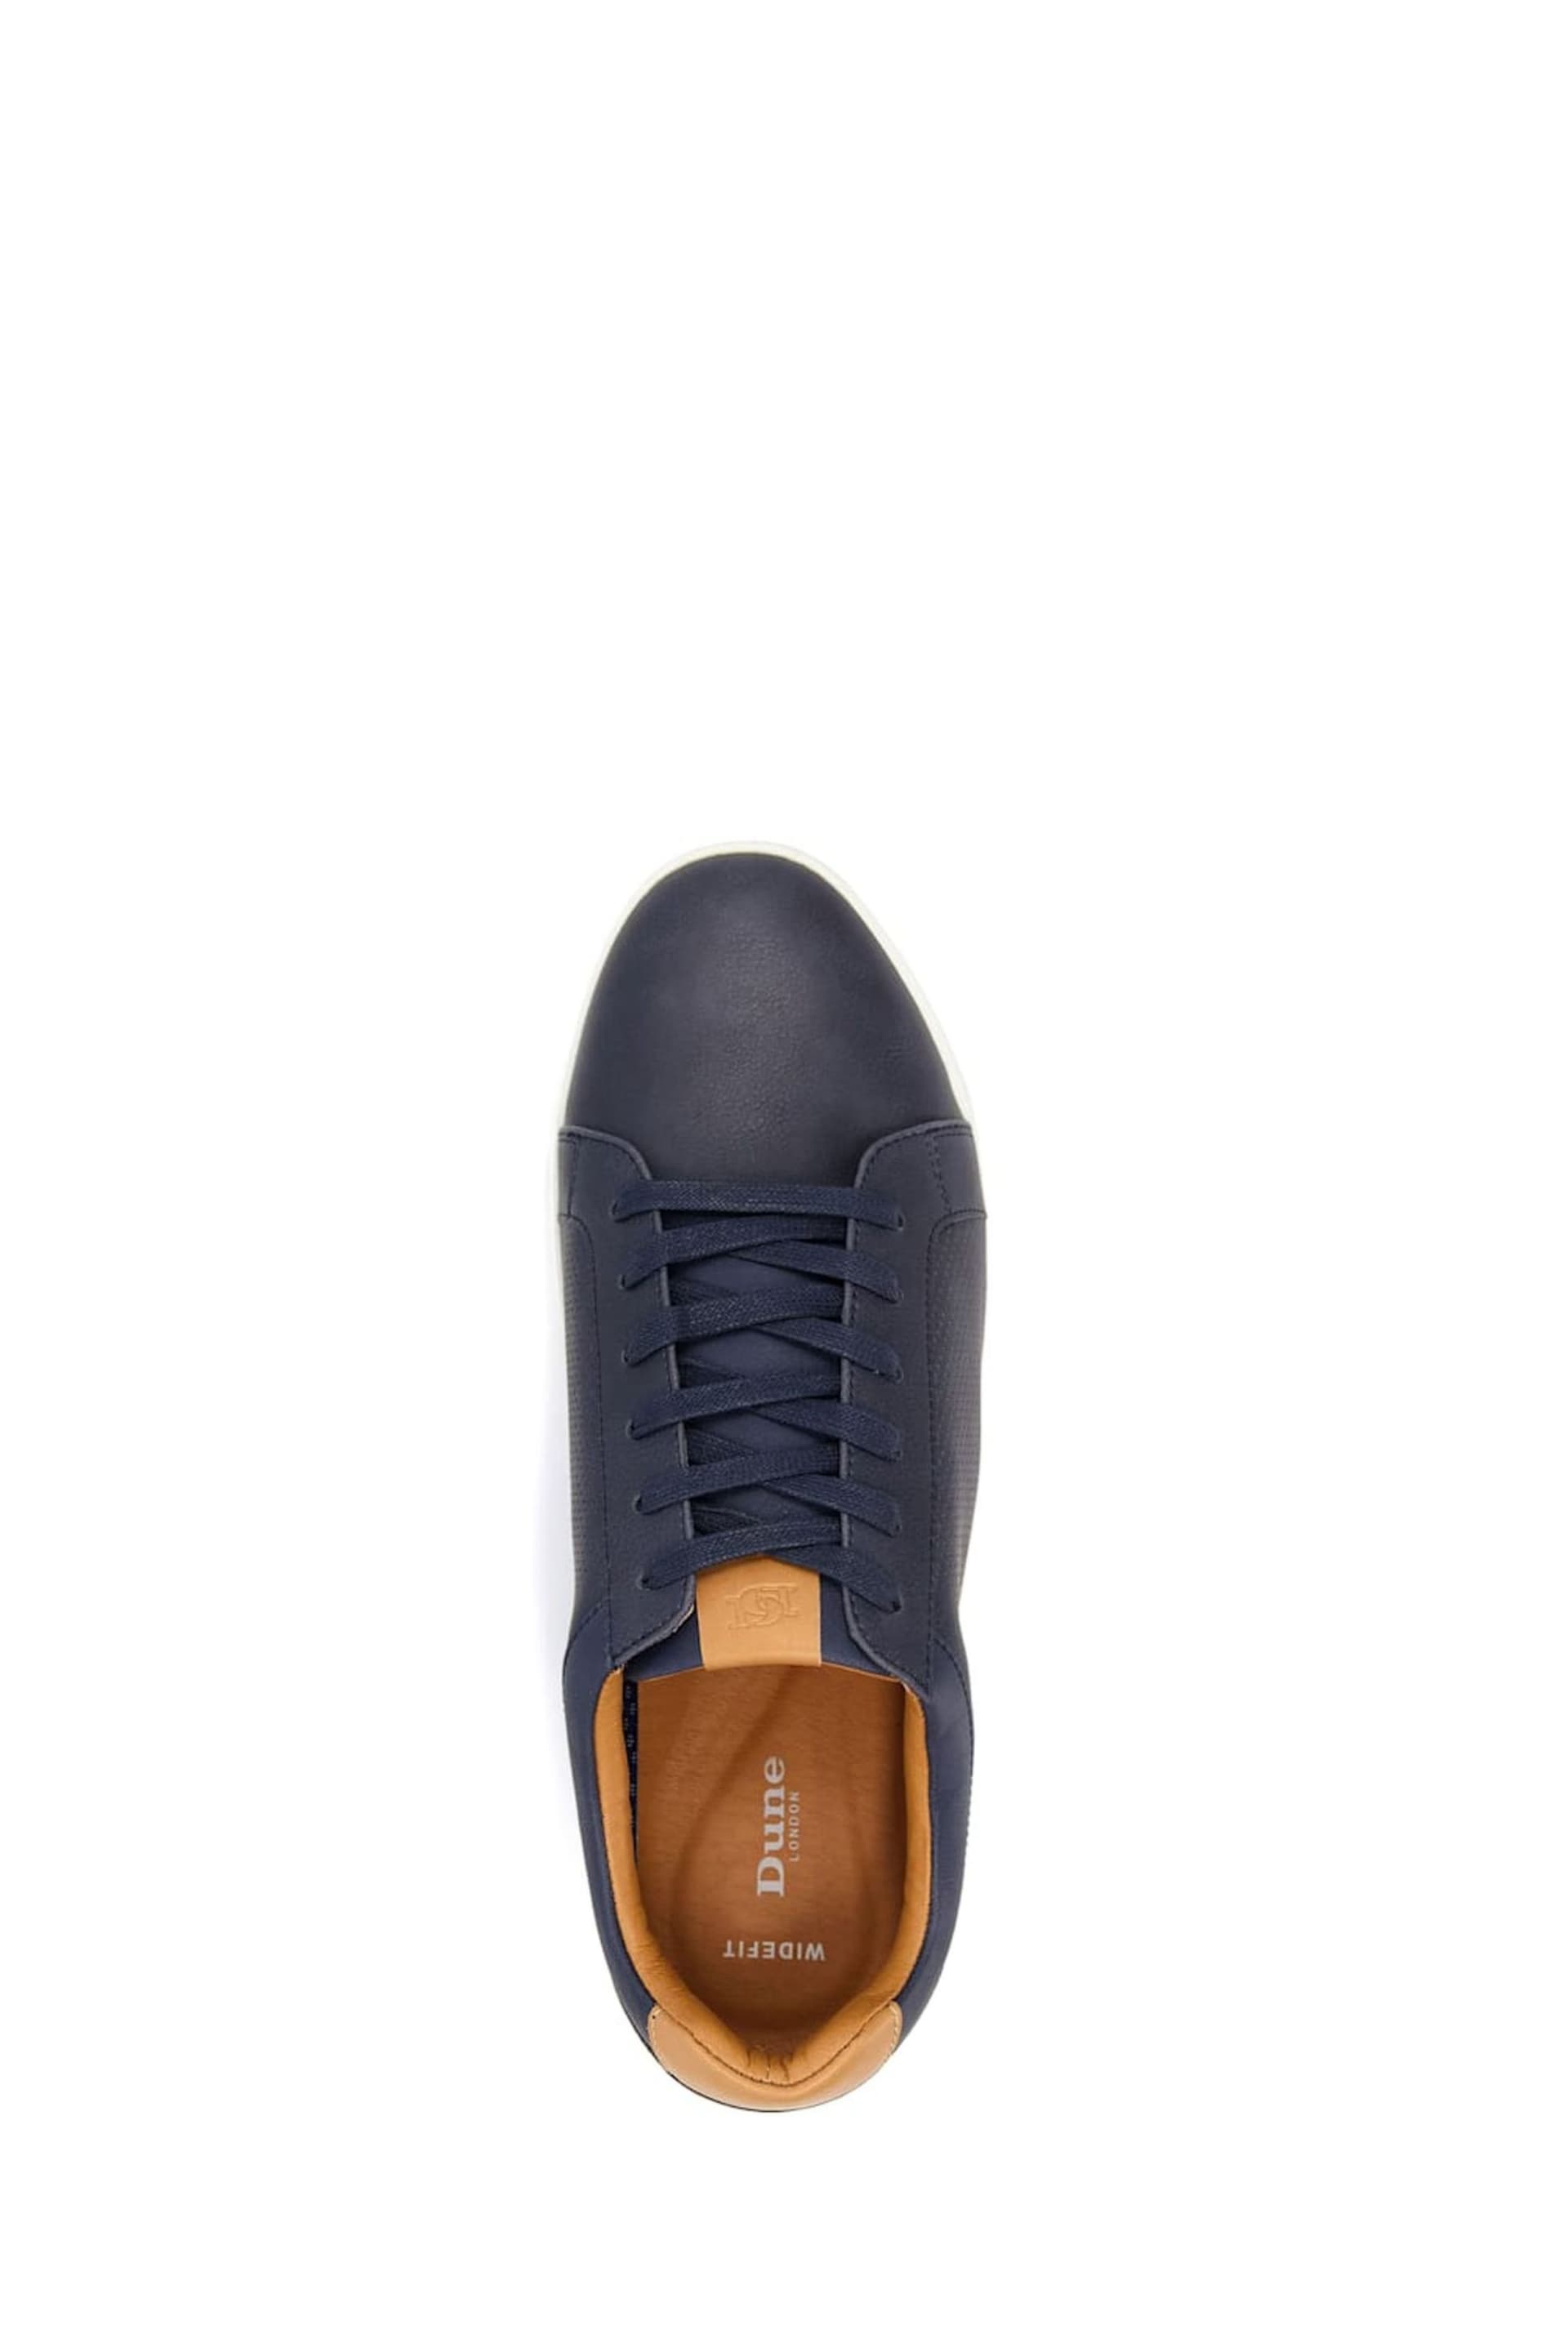 Dune London Blue Wide Fit Tezzy Perf Trainers - Image 2 of 4